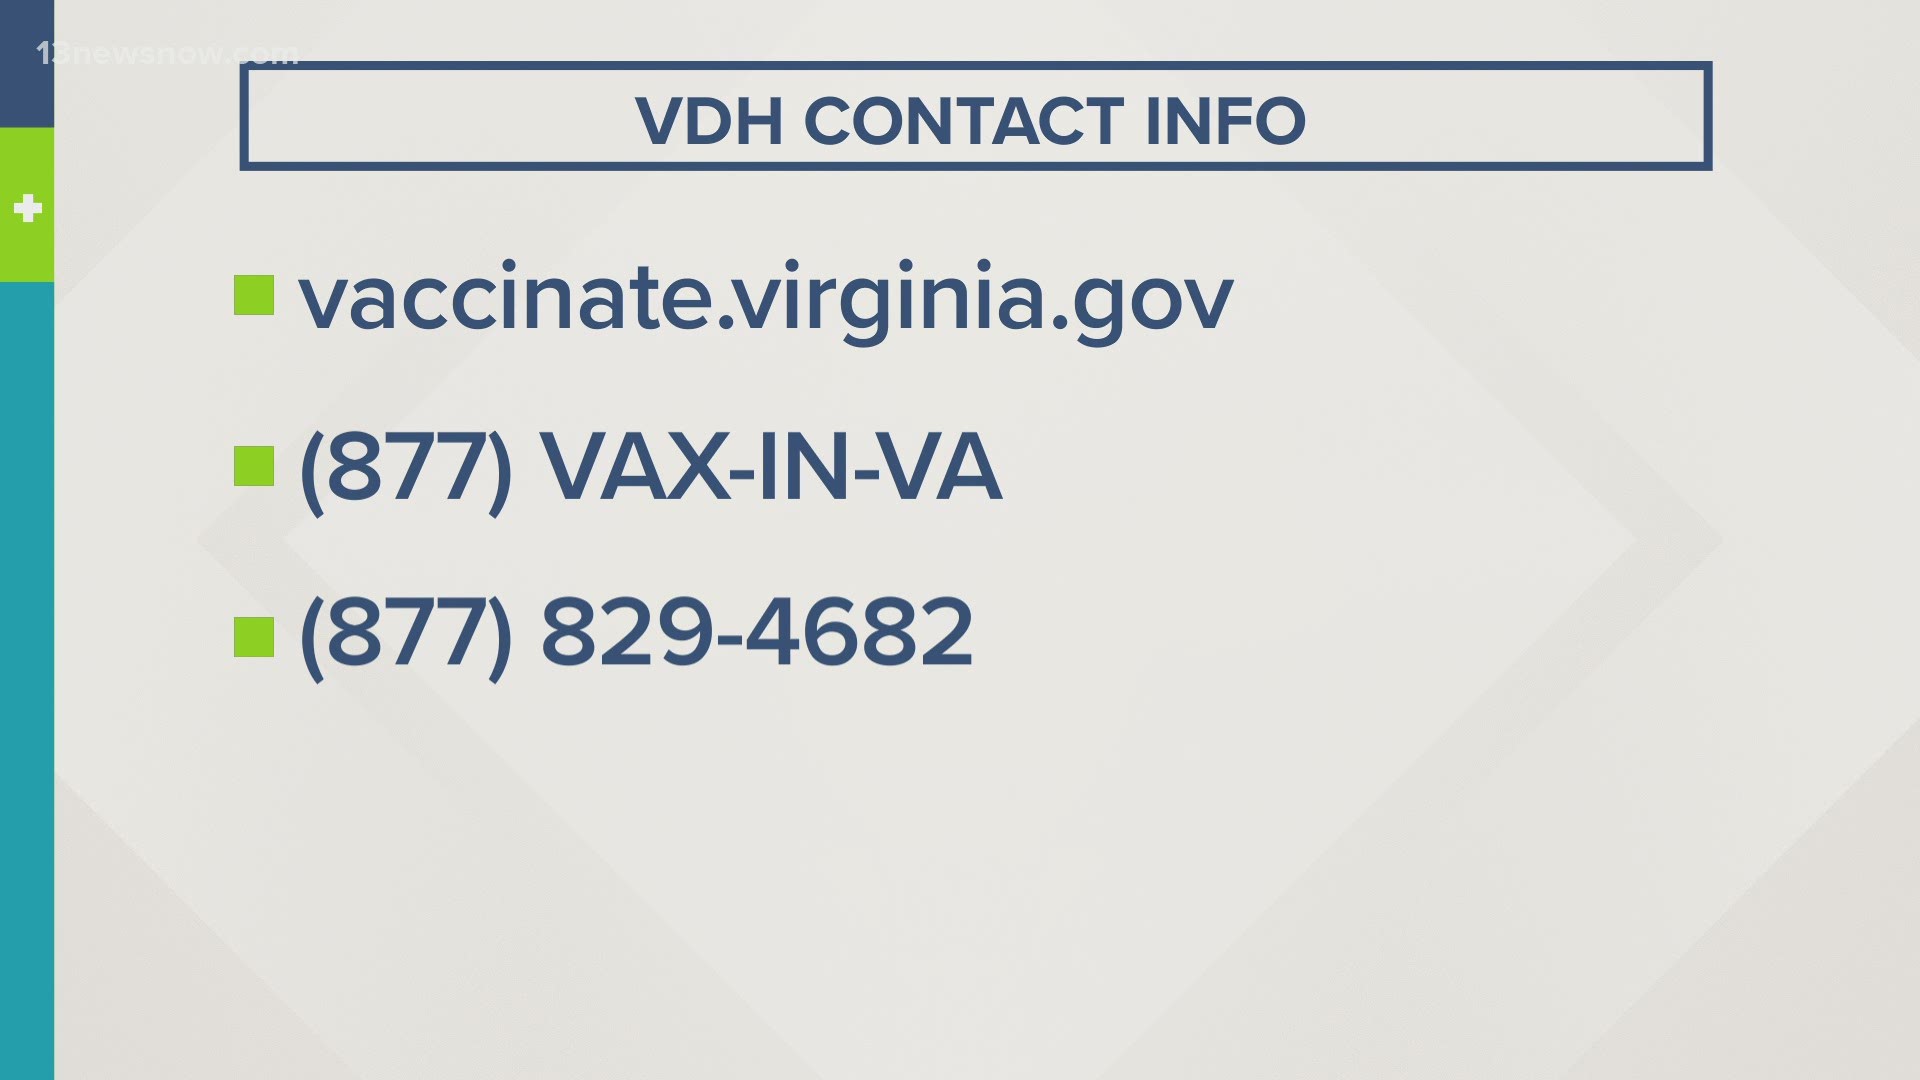 Starting April 12, anyone 16 or older who lives and works in areas under the Western Tidewater Health District will be able to get a COVID-19 shot.